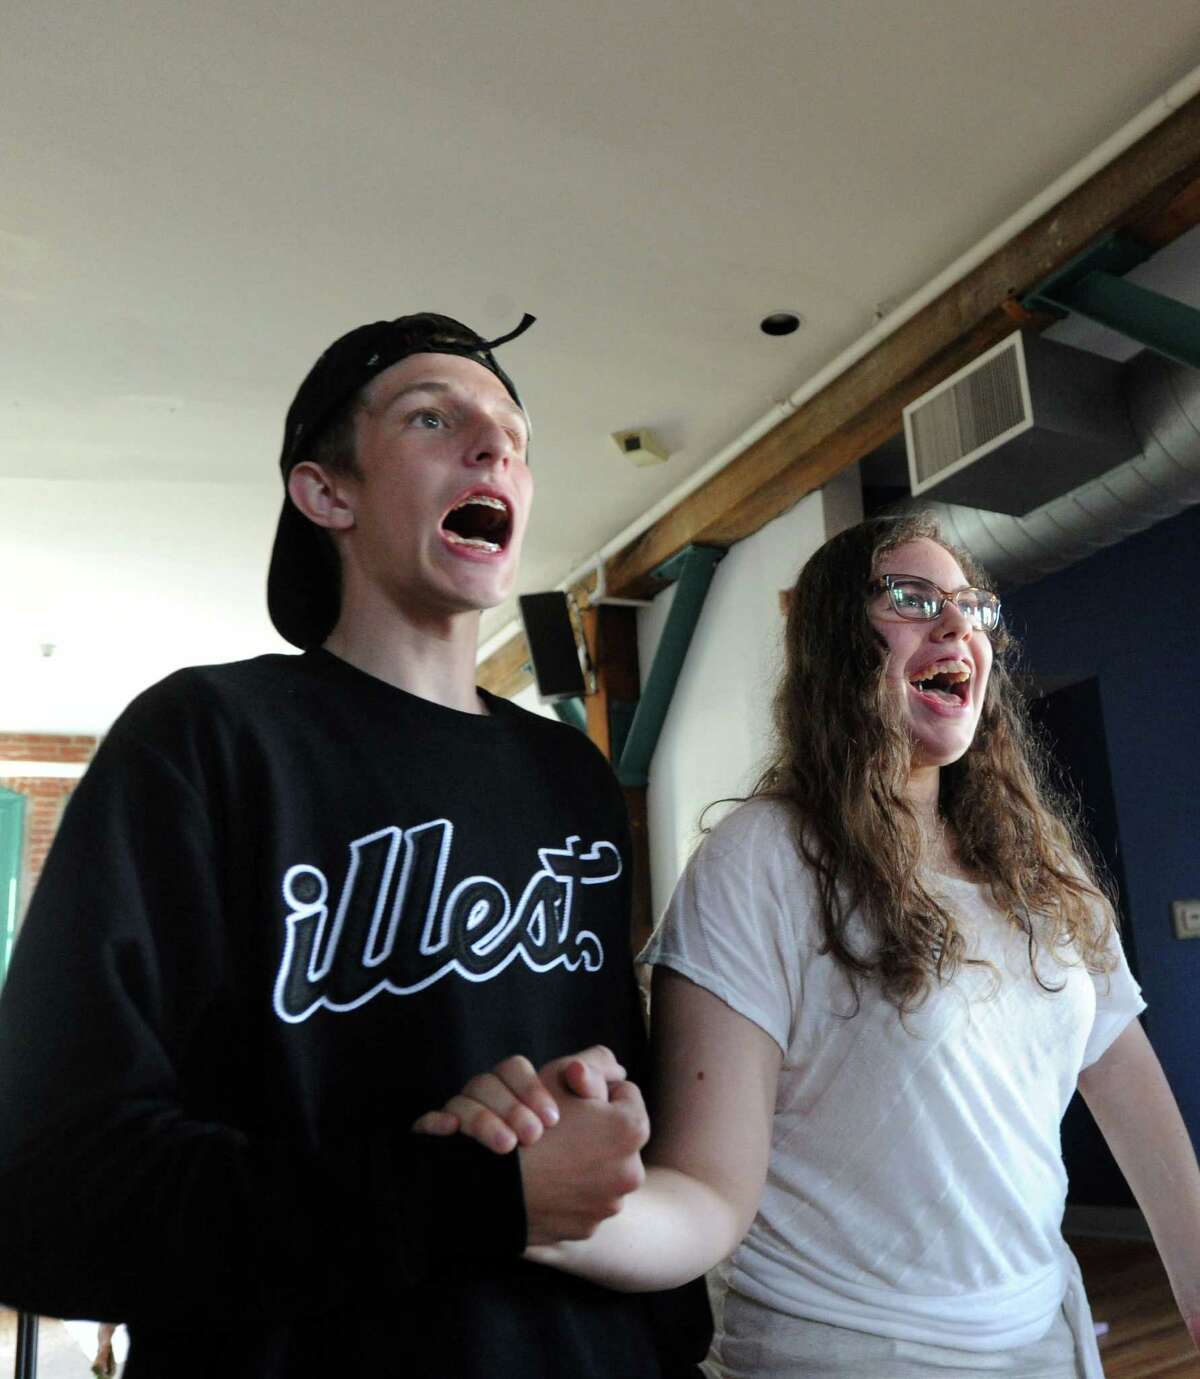 Actors, Django Vaz, 17, left, and Meredith Martin, 18, during the Off-Beat Players rehearsal of Spamalot at the Arch Street Teen Center, Greenwich, Conn., Thursday night, July 24, 2014. The Off-Beat Players is a long-running theater program that brings together children both with and without special needs in all roles of the show. Spamalot will run August 6th through August 9th at the center.